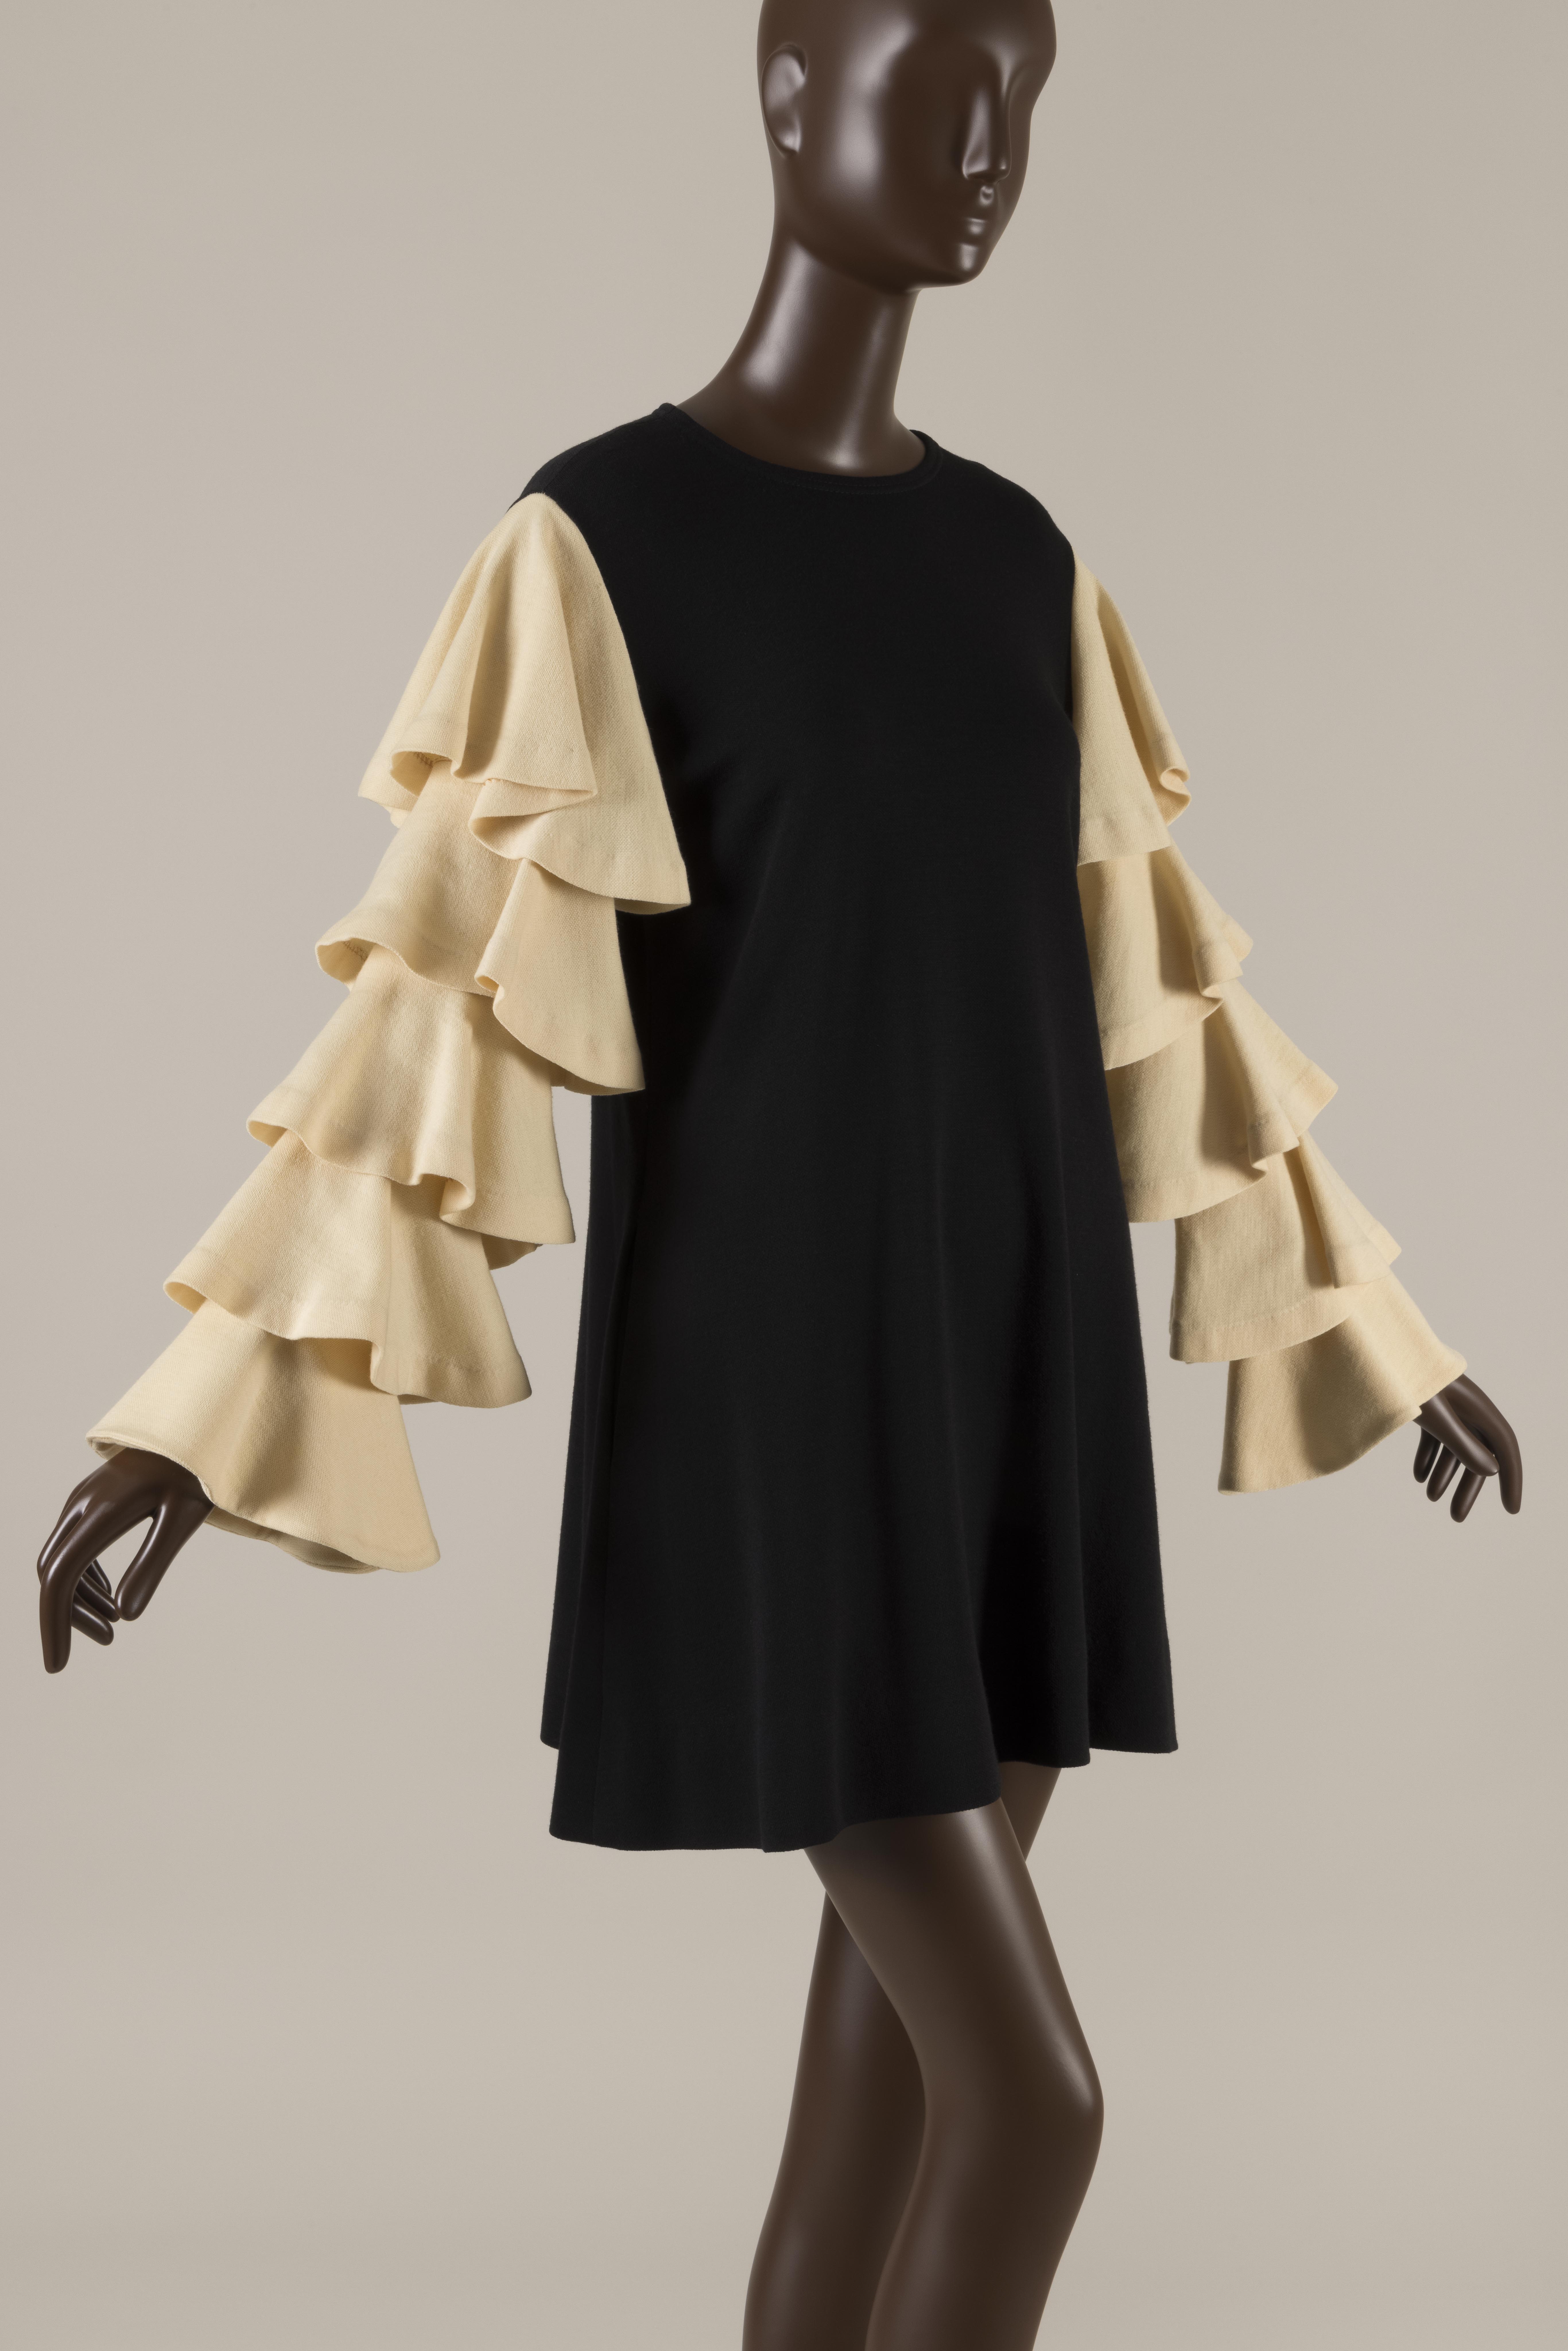 black wool dress with a high neckline and cream colored tiered ruffle sleeves